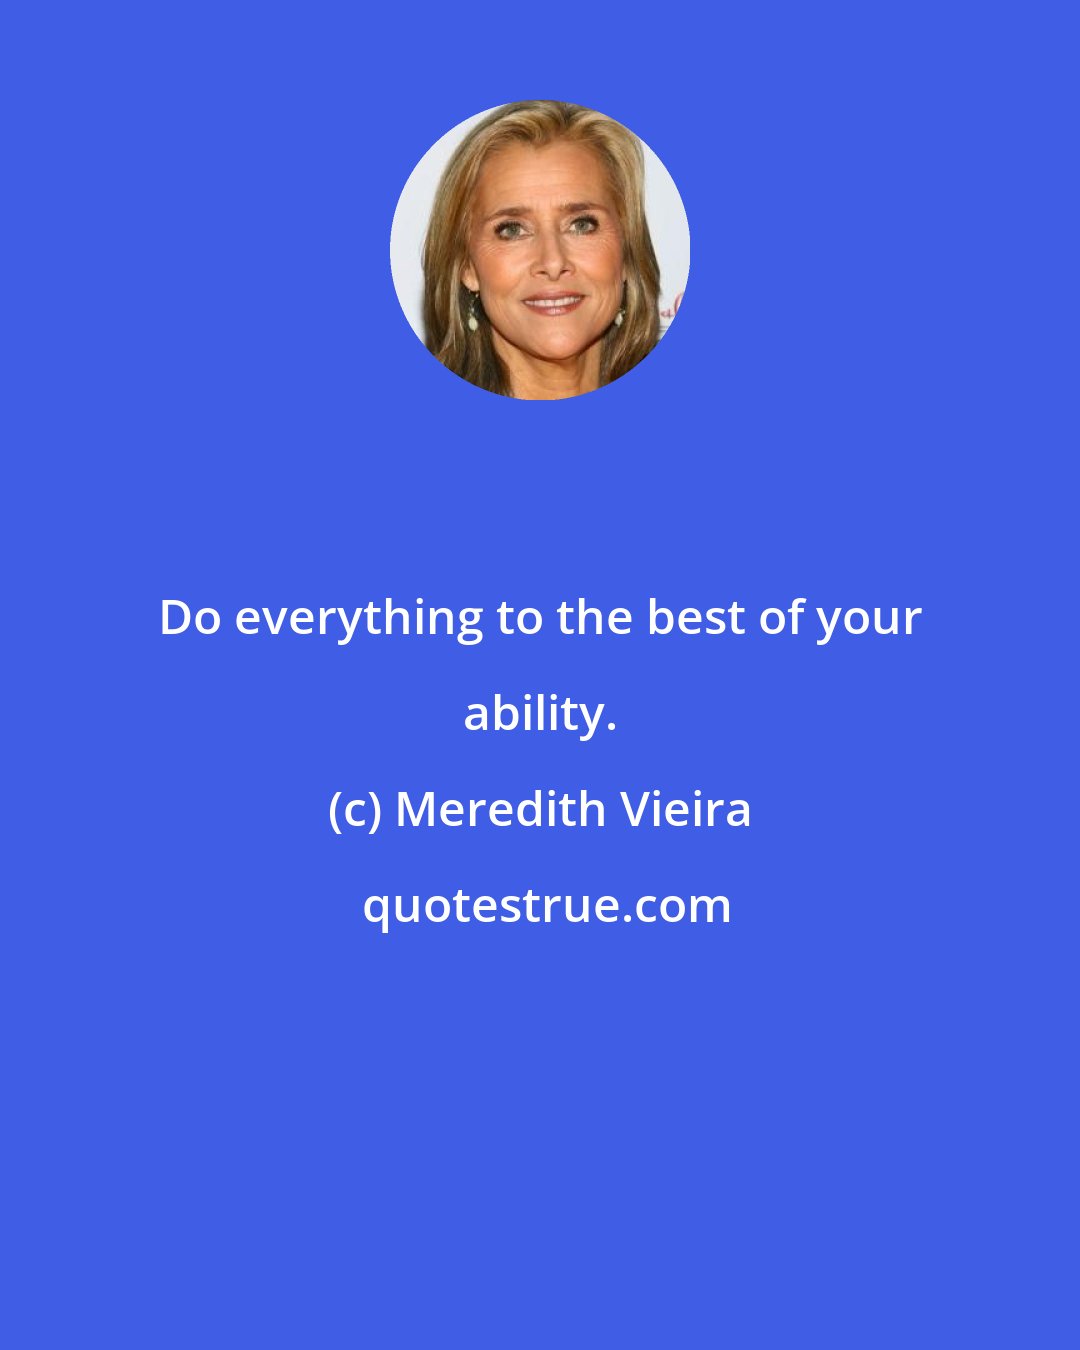 Meredith Vieira: Do everything to the best of your ability.